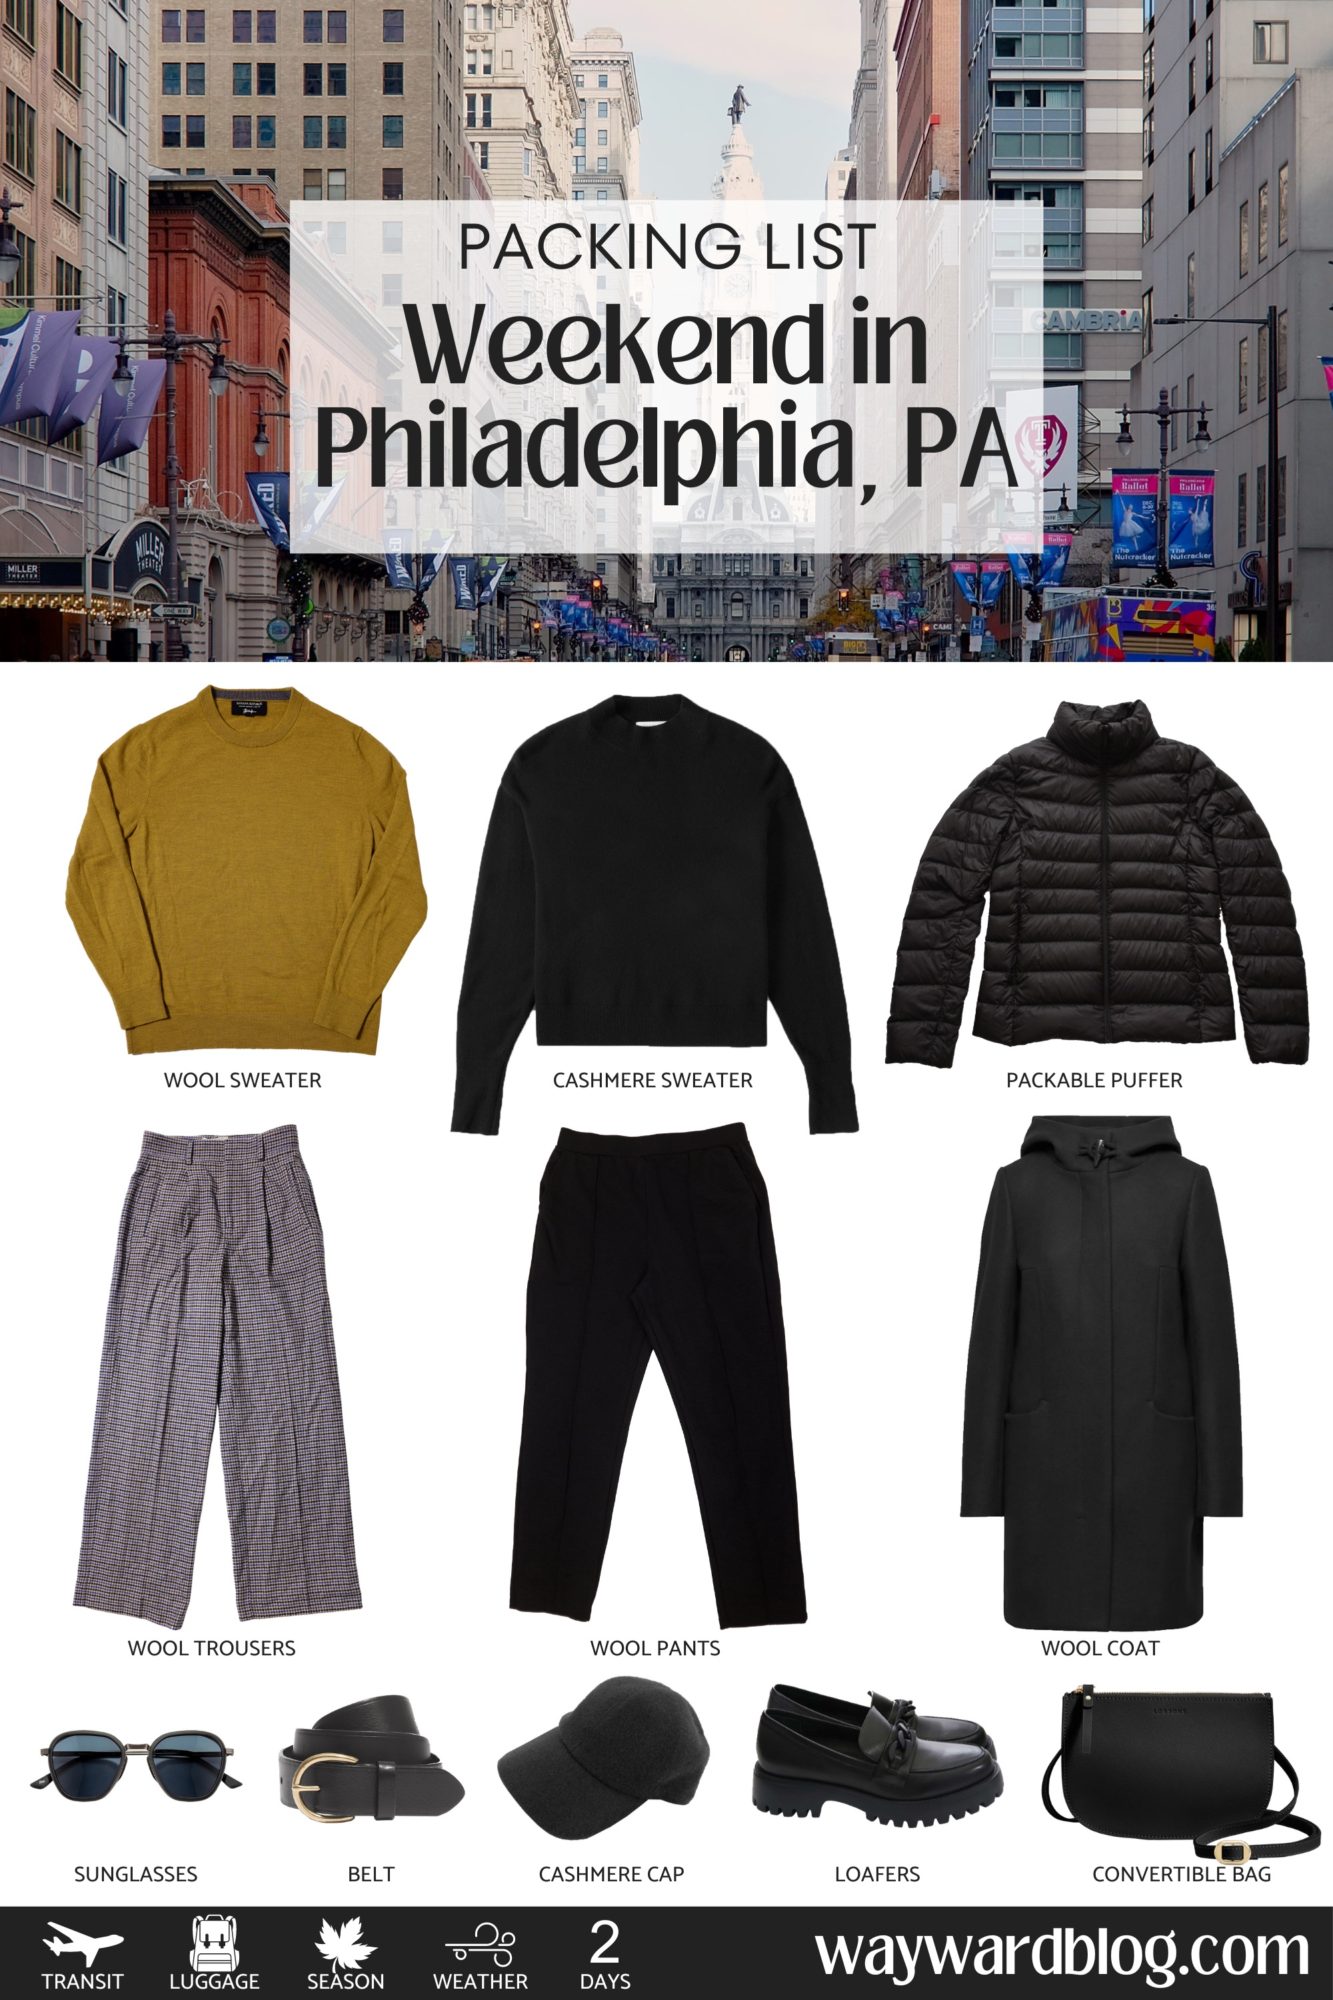 A collage of all the garments in the packing list for Philadelphia